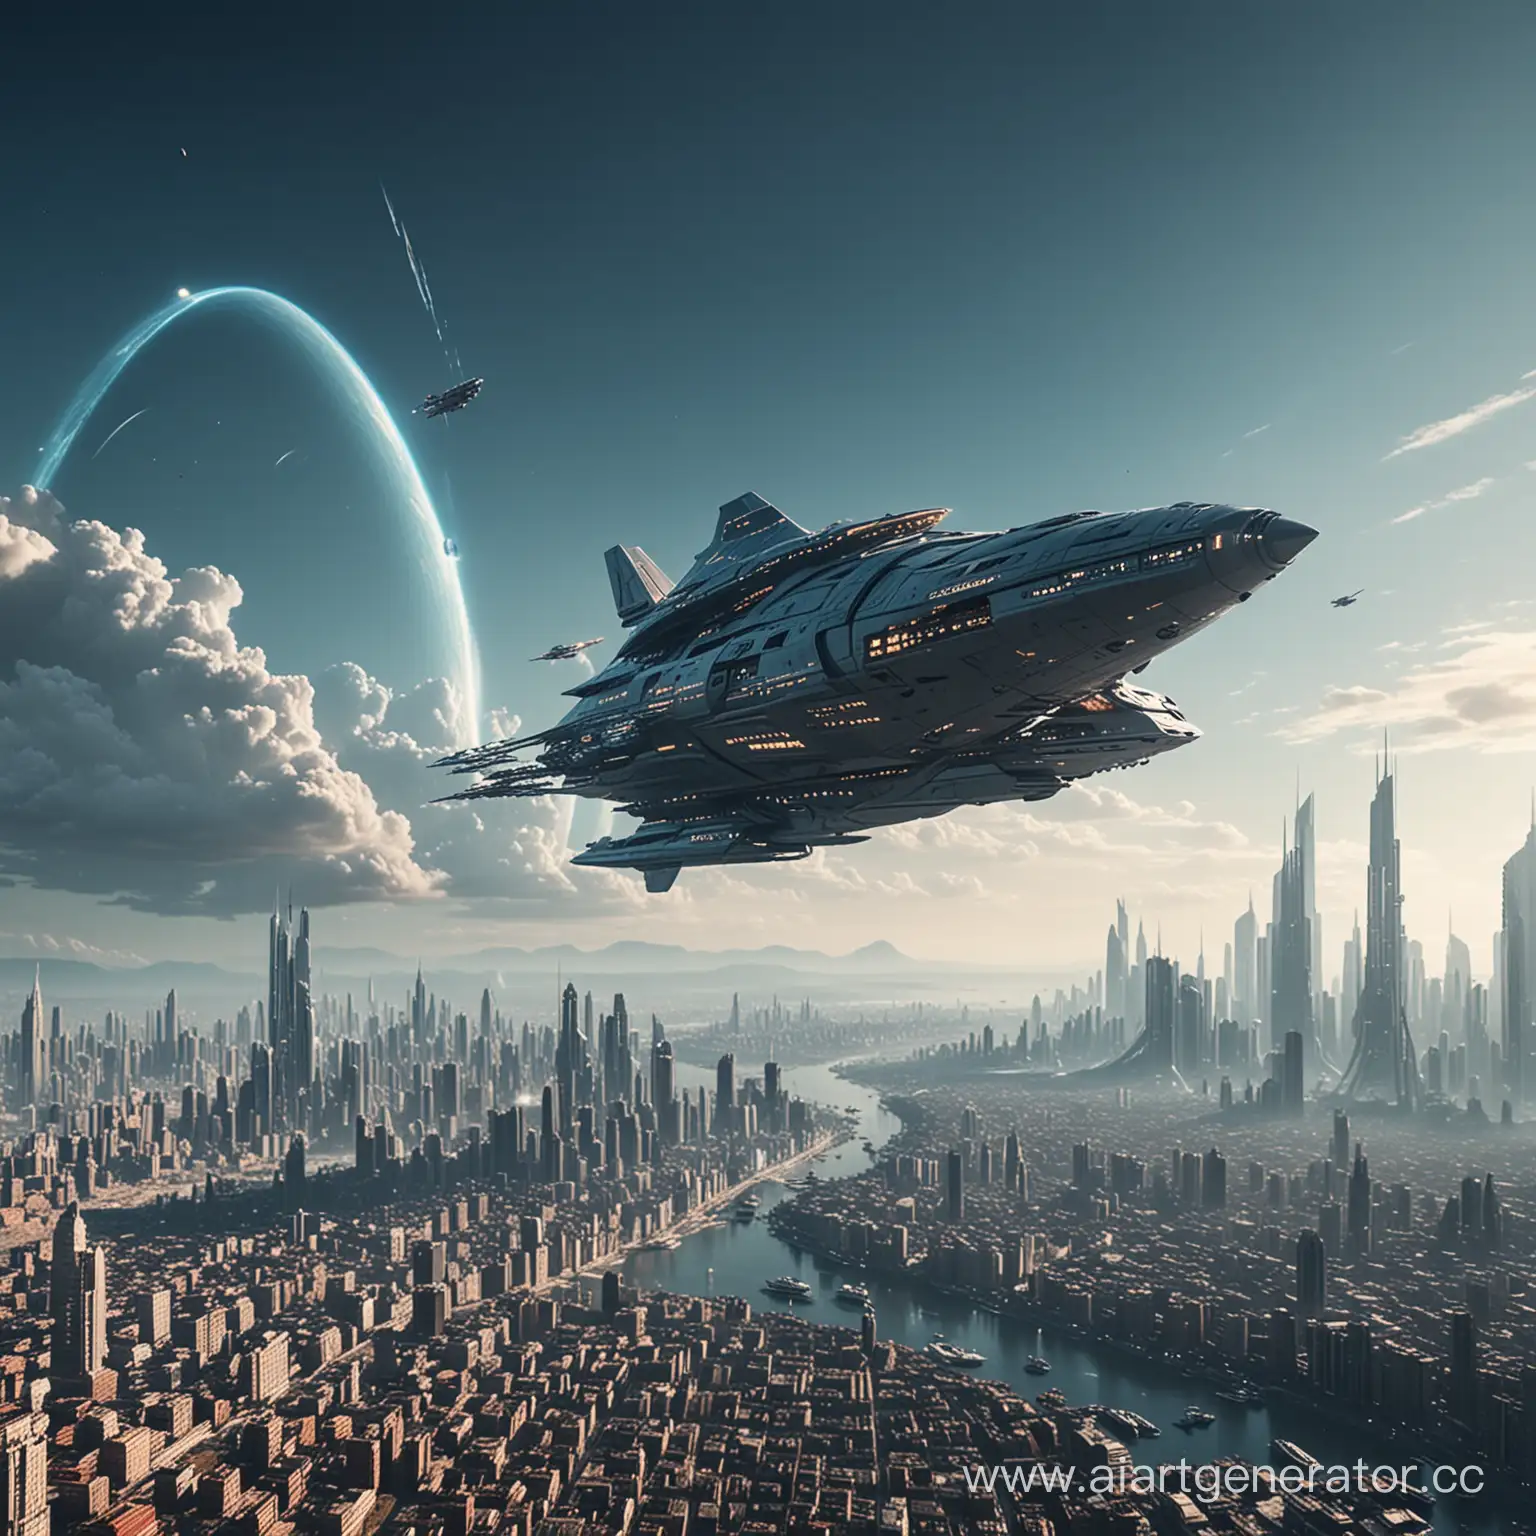 Futuristic-Cityscape-with-Giant-Spaceship-in-Serene-Ambiance